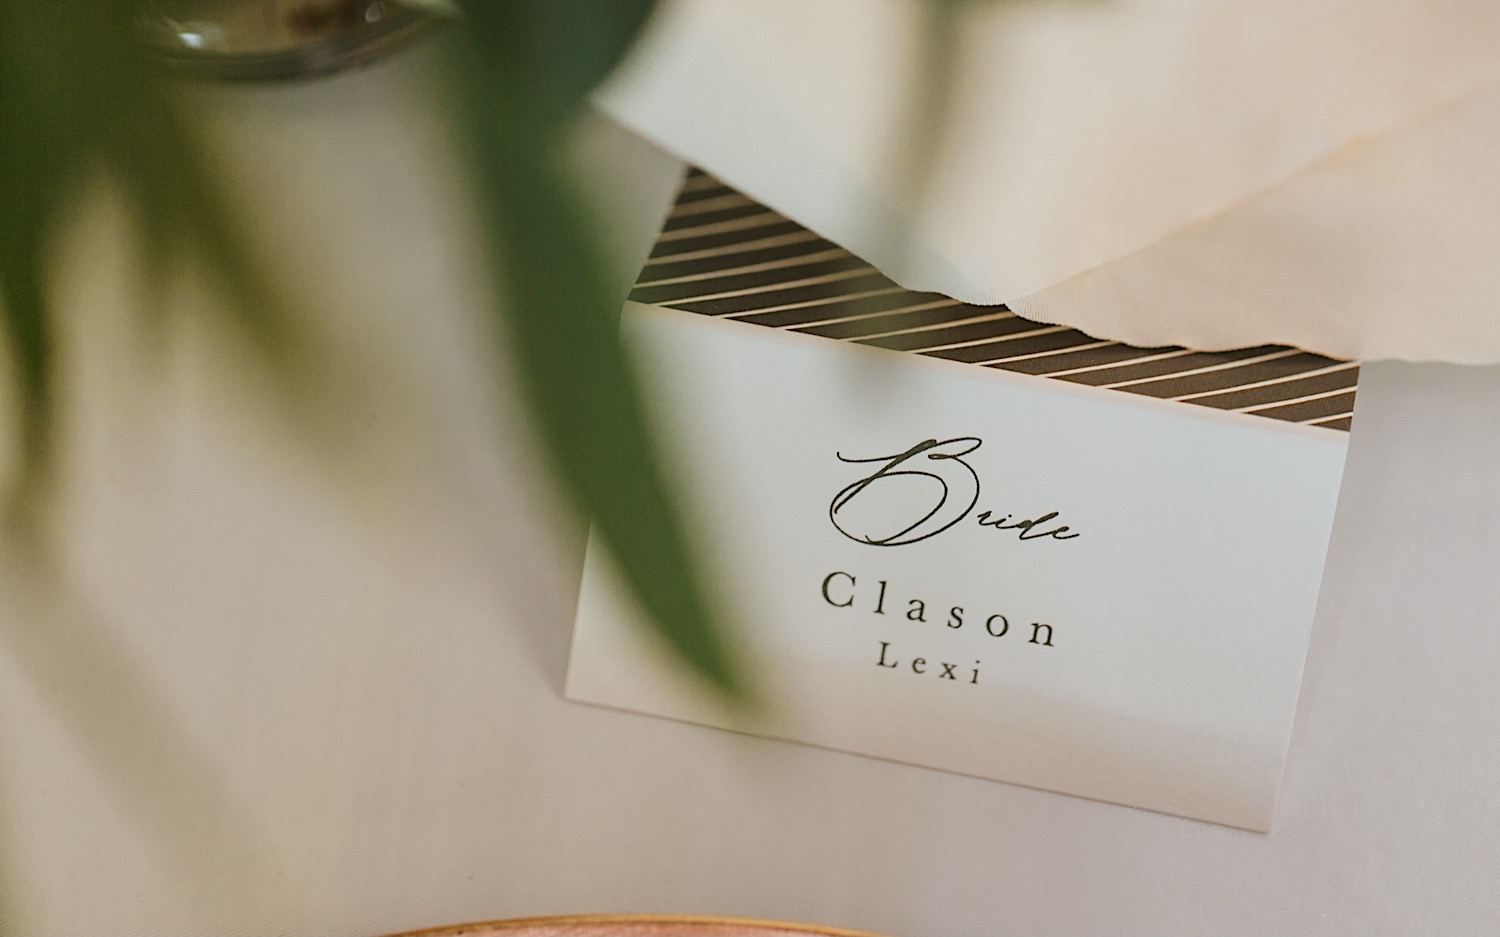 Close up photo of a table tag reading "Bride, Clason Lexi"